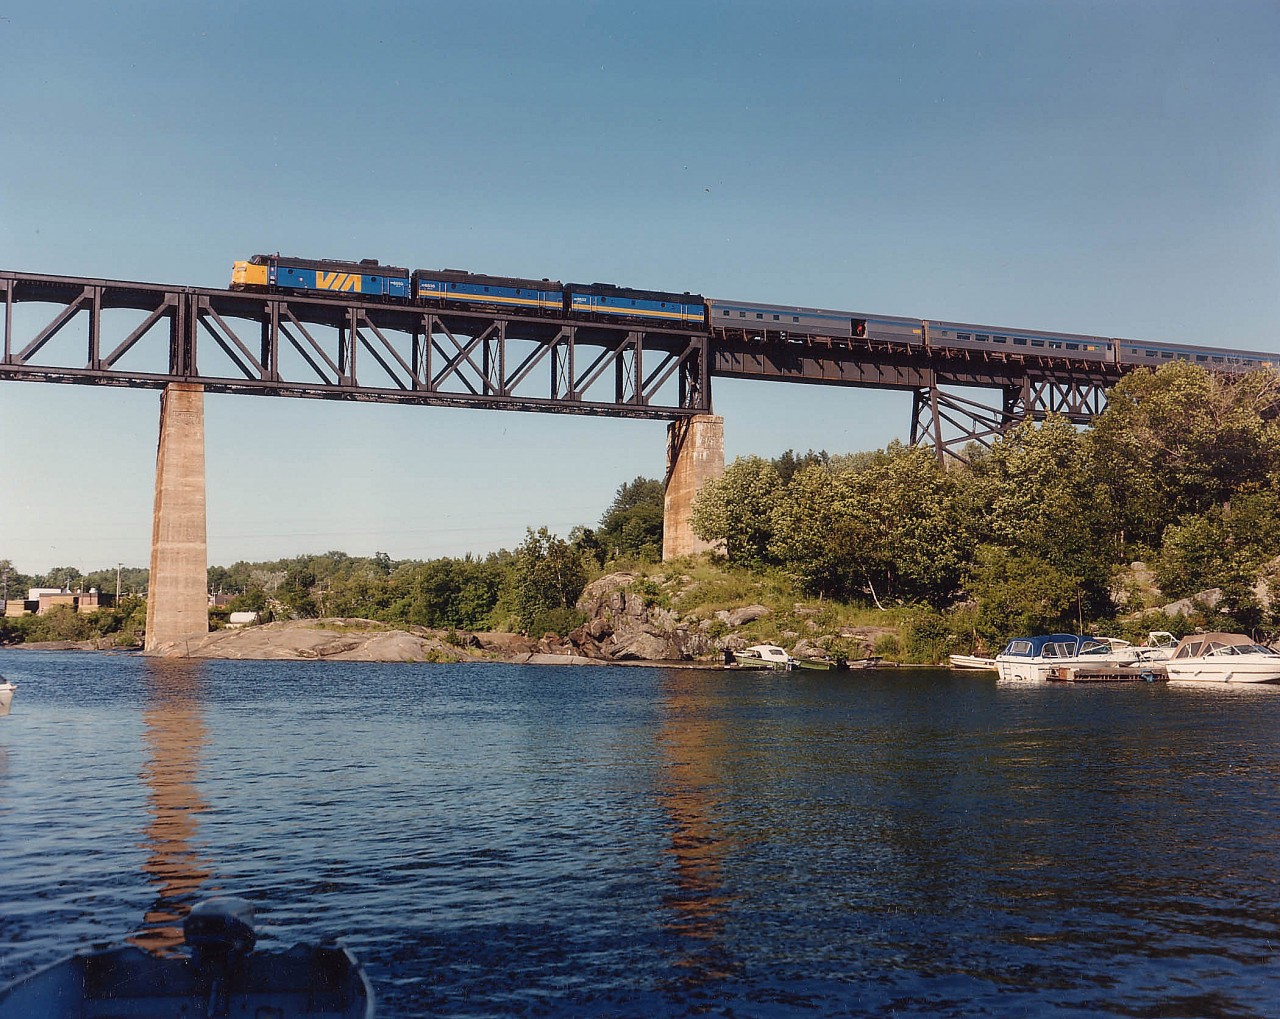 The northbound "Canadian" #9 rolls over the trestle at Parry Sound on a beautiful summer's day with VIA 6550, 6636 and 6632 the power. The leader has an interesting history; began as CP 4099 in 1953, then to CP 1400, to Nebkota as their #55, and back to CP 1400 in 1998 when it was painted up in tuscan and grey as well as being upgraded to an FP9 from an FP7. Unfortunately it was retired from active duty early in 2012.